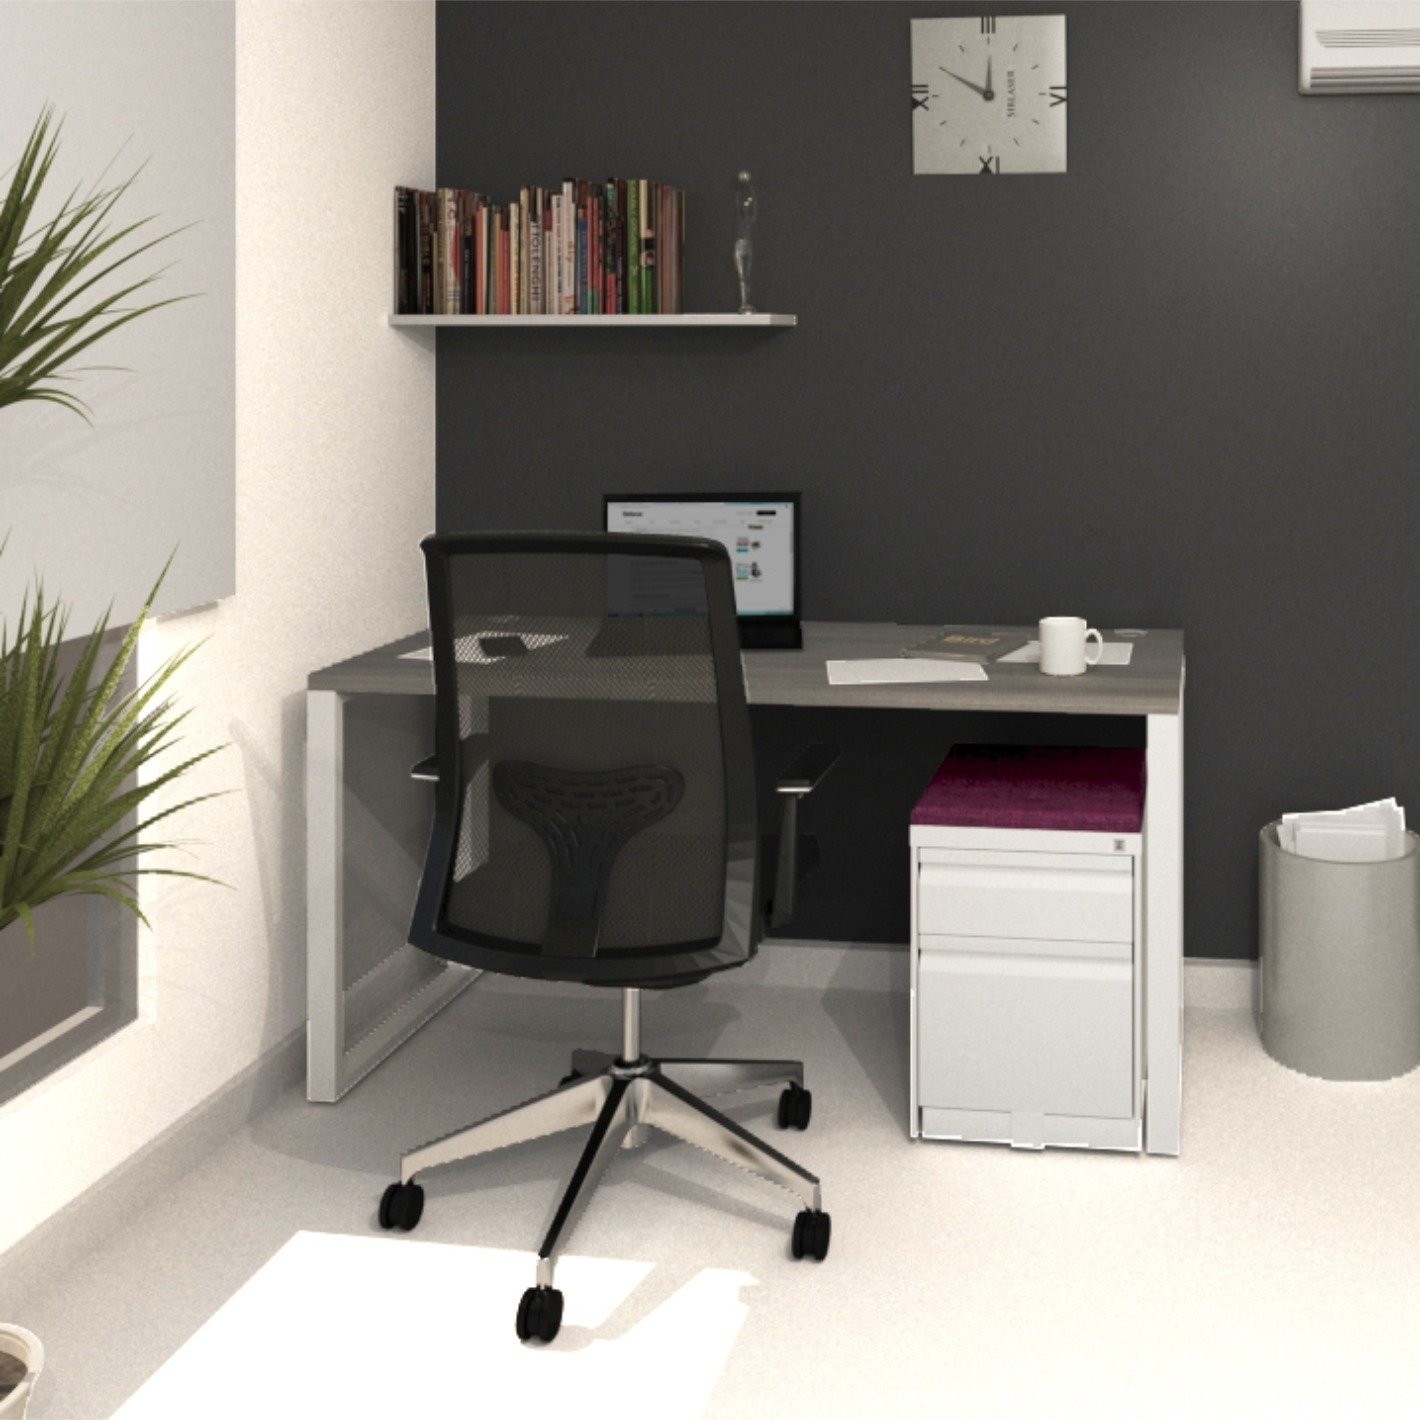 file-cabinet-home-office-layout